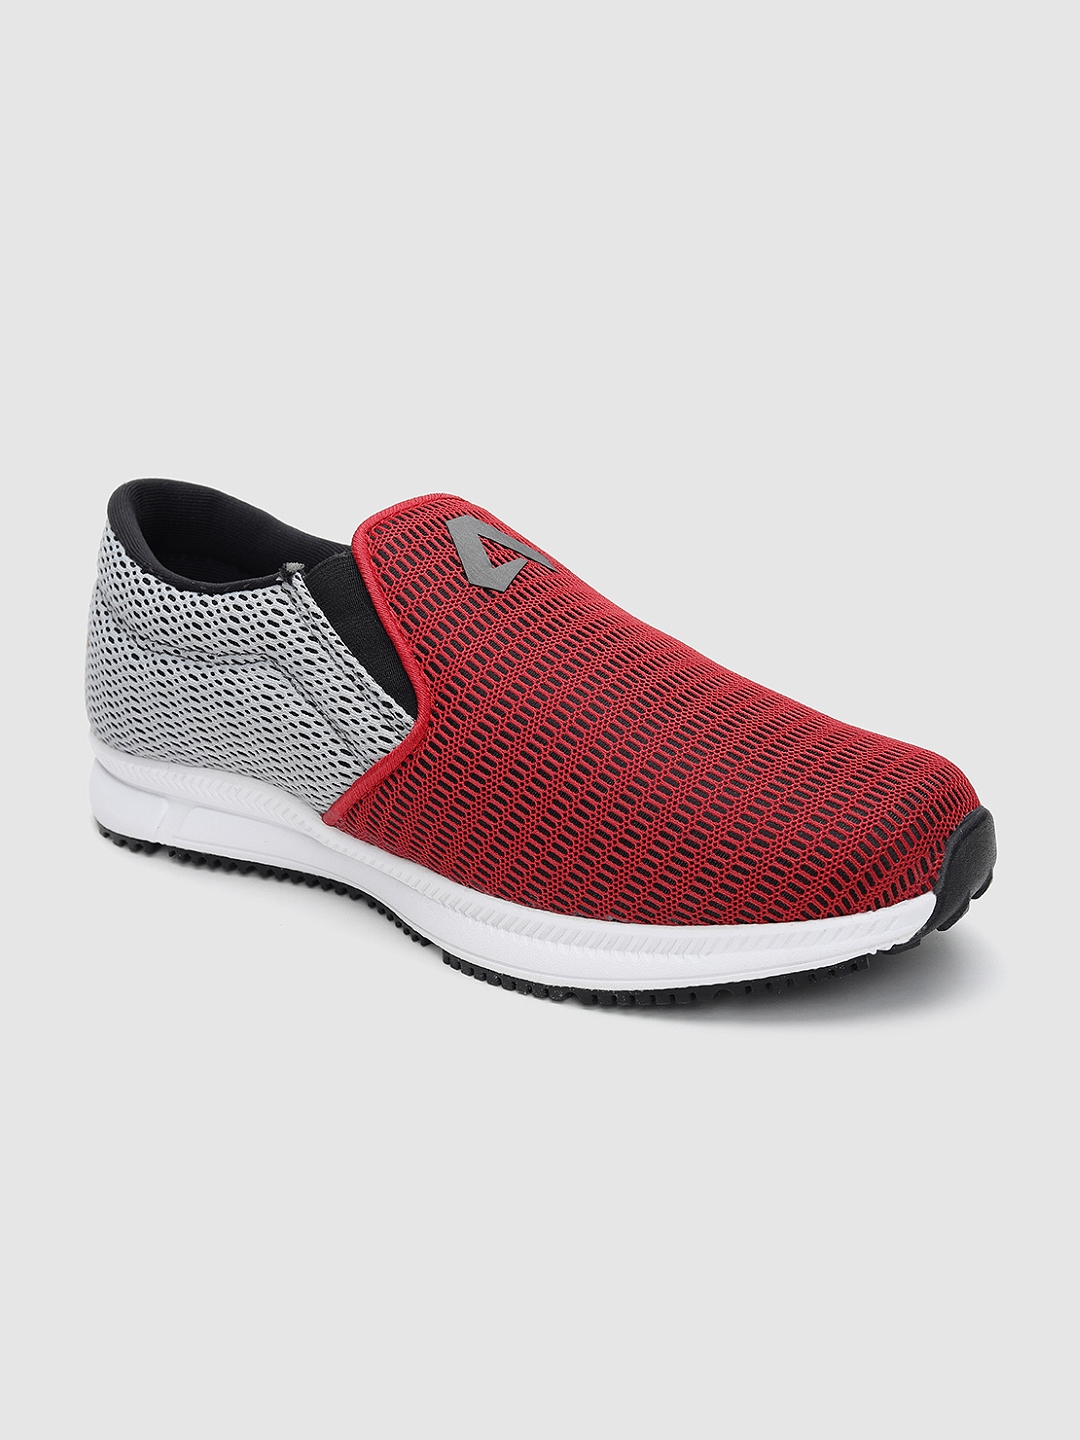 Buy AVANT Men Red & Grey Running Shoes - Sports Shoes for Men 11675564 ...